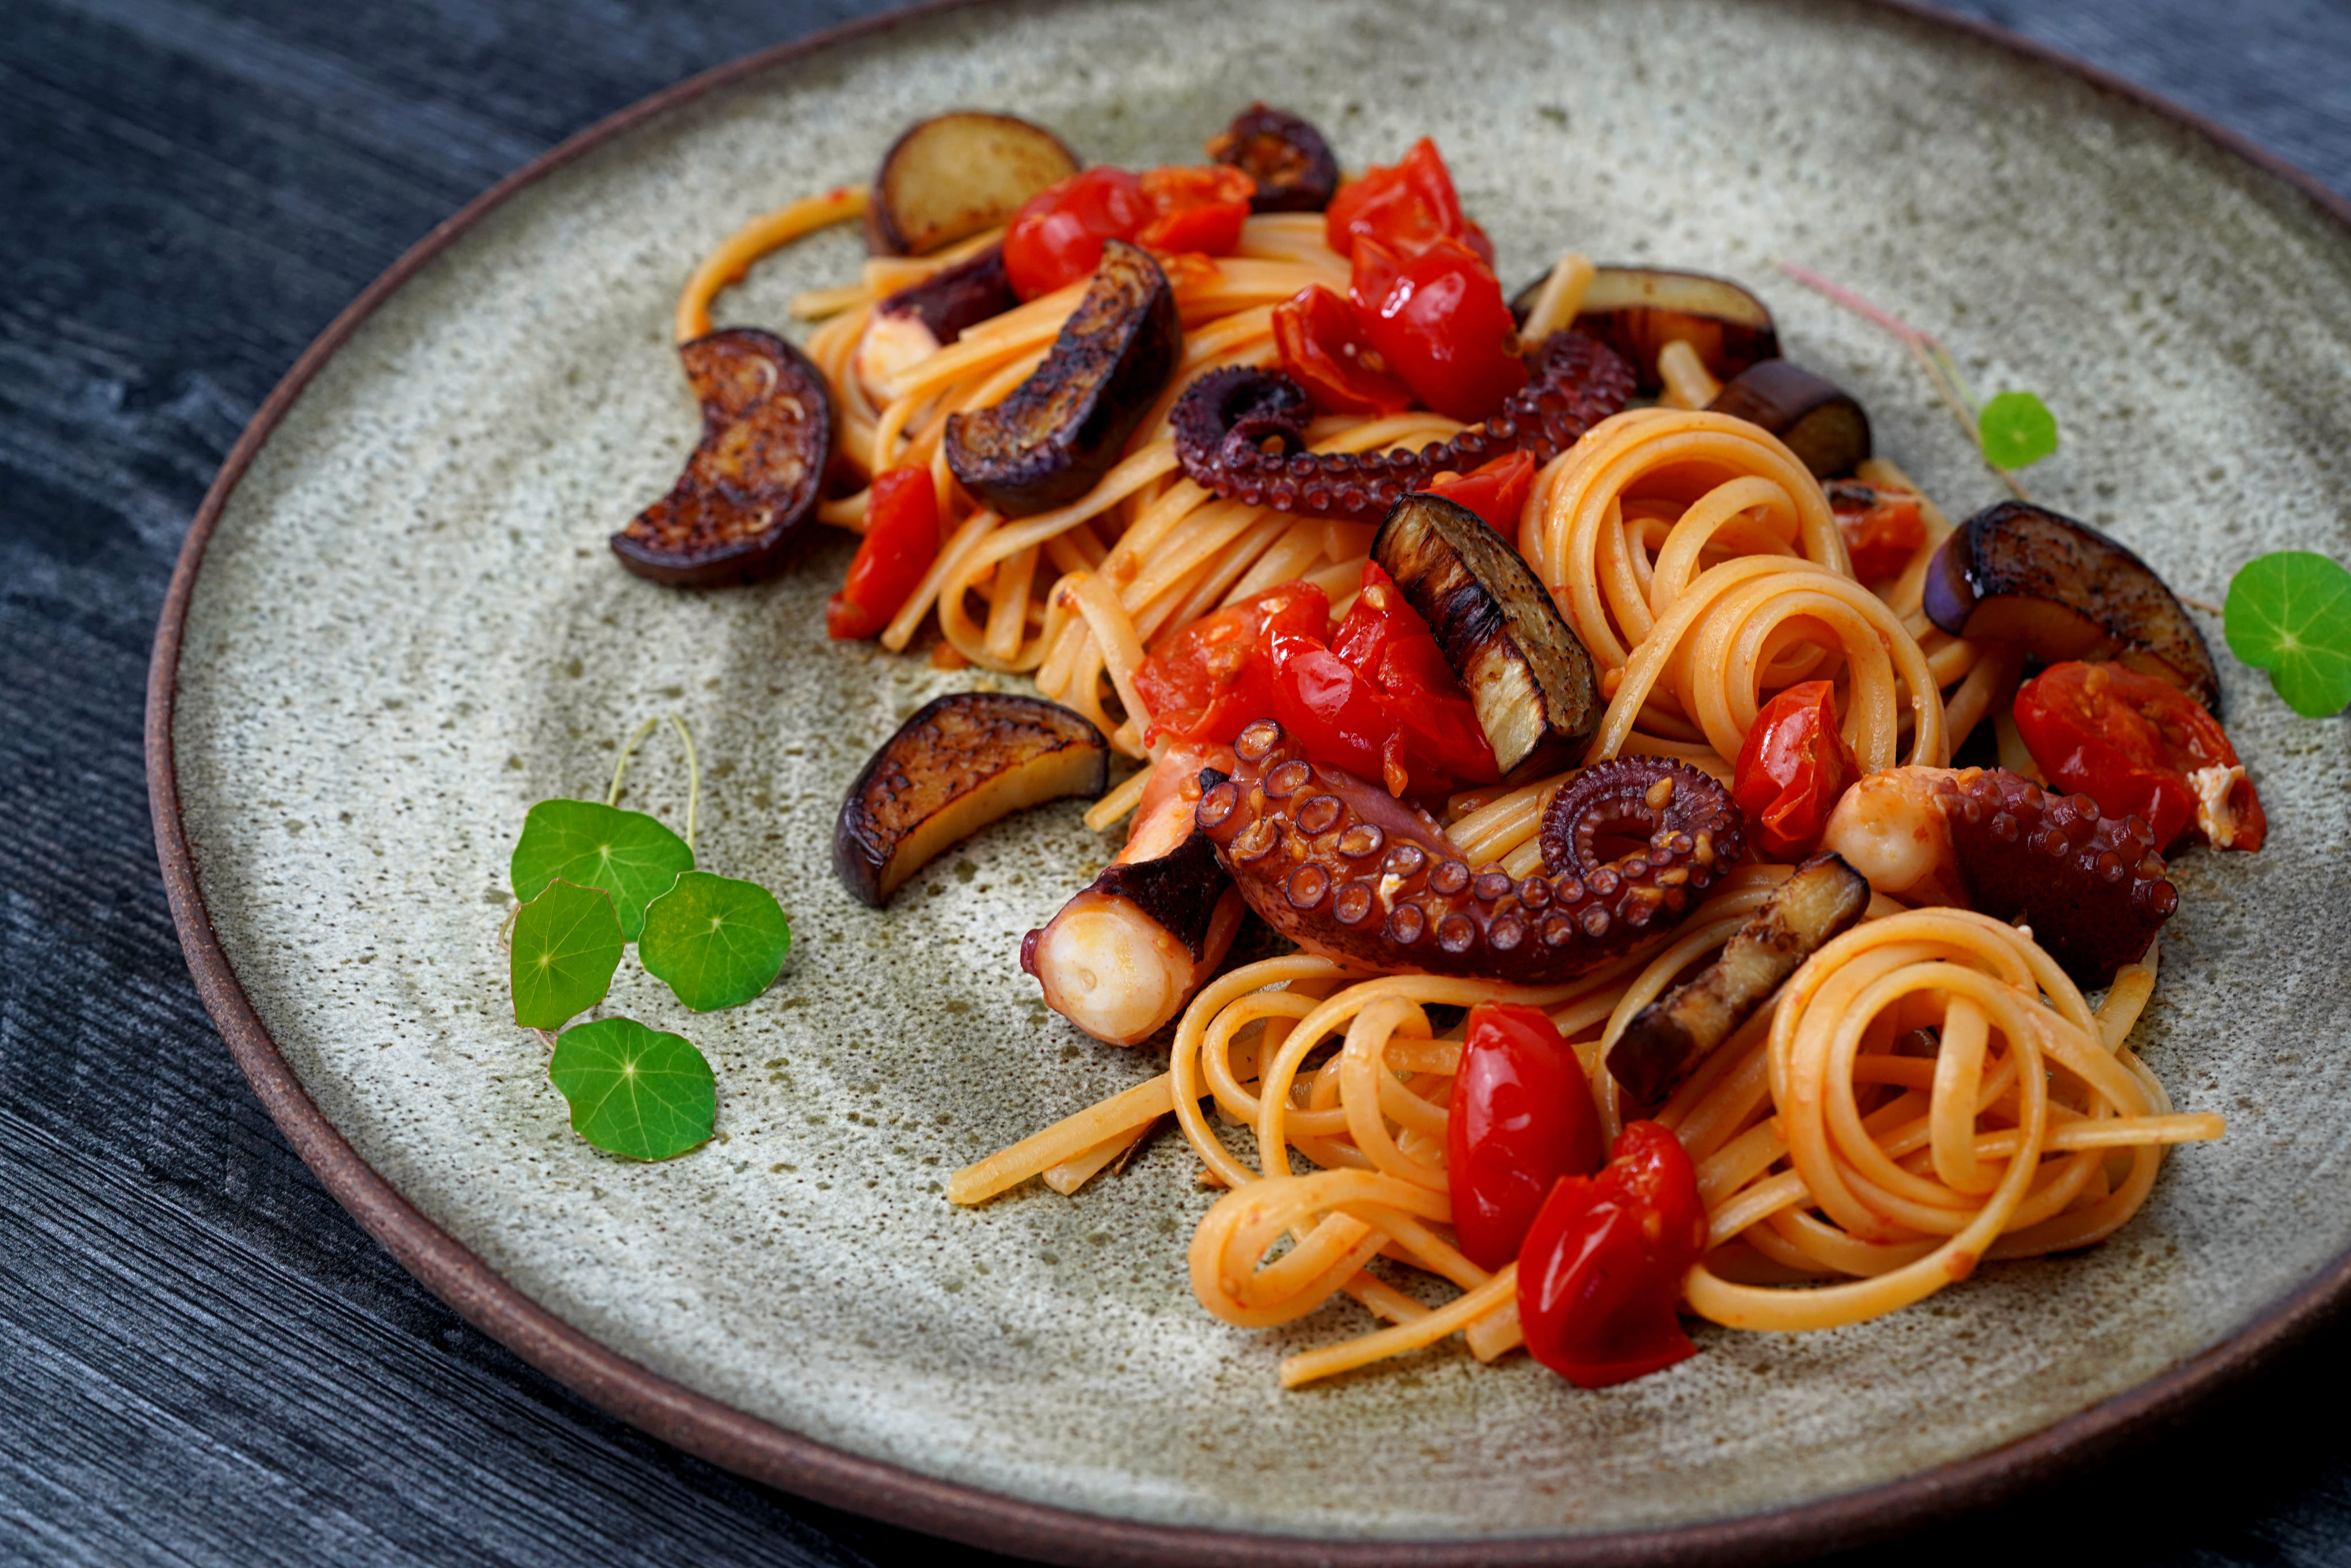 Linguine, Octopus, Fried Eggplant and Cherry Tomatoes